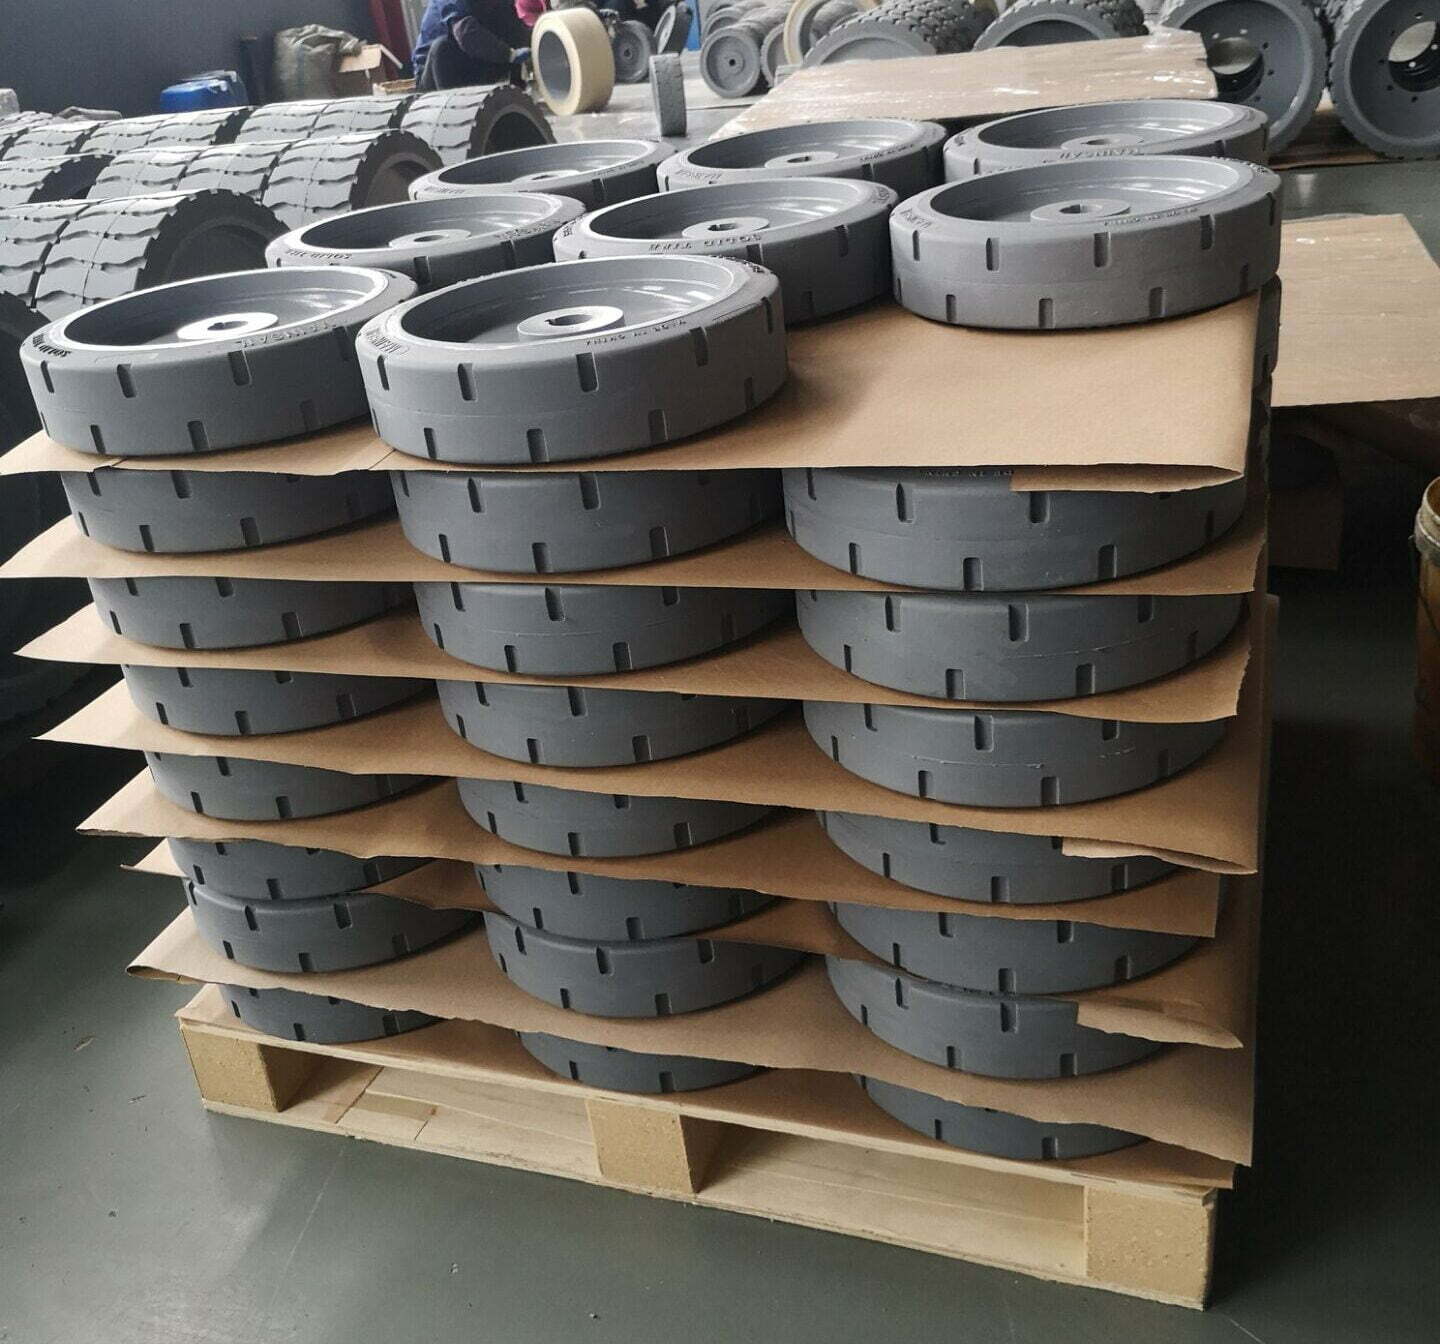 Solid Platform tires ready to go for our Middle East customer